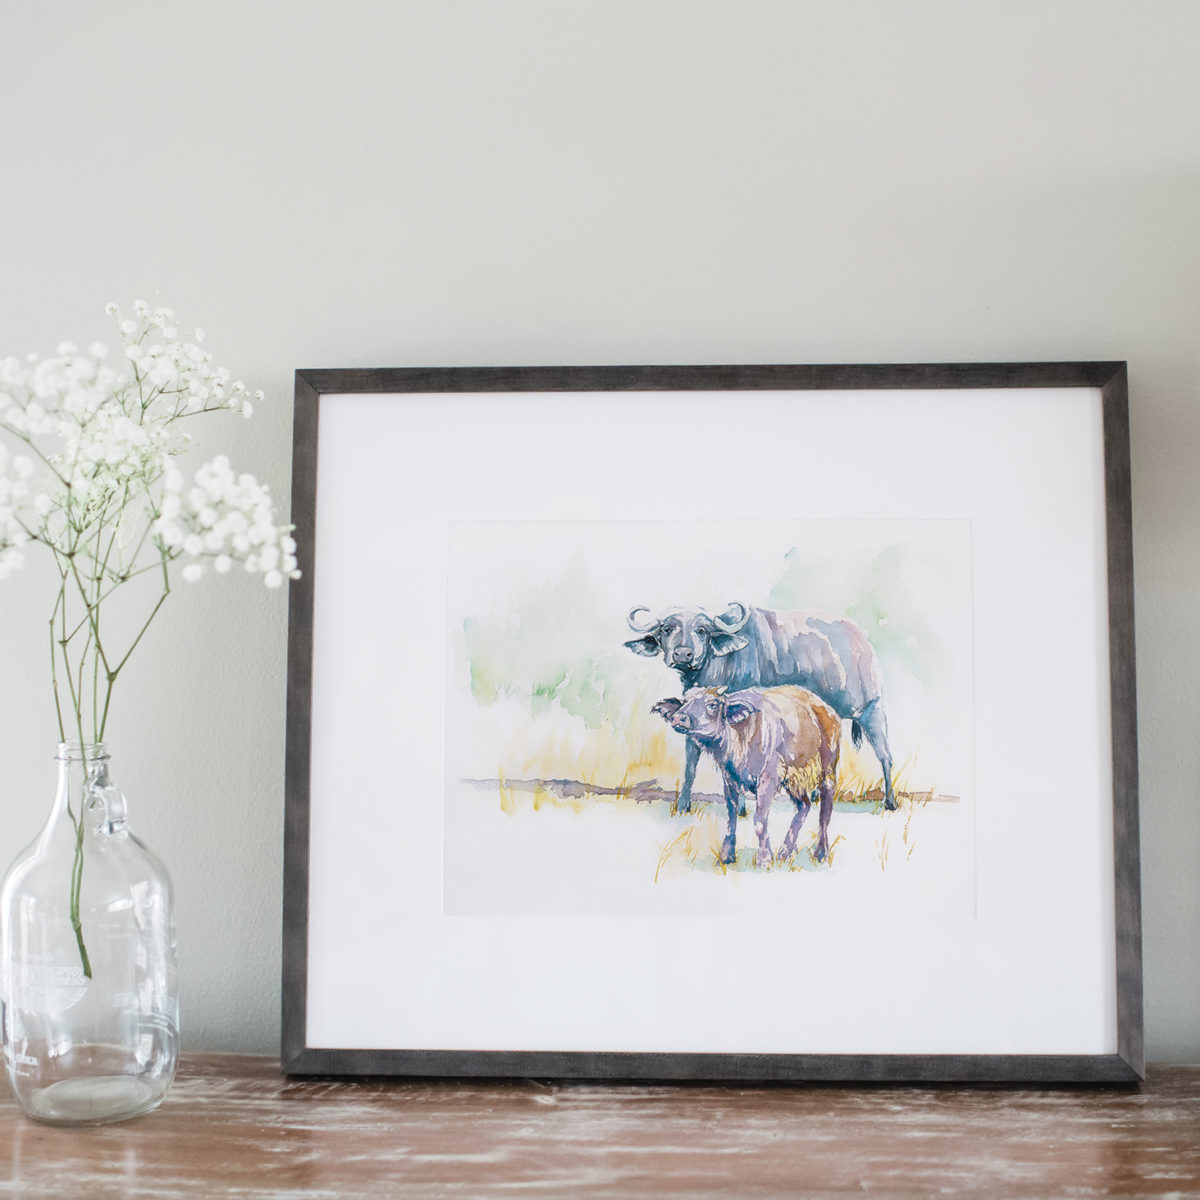 Watercolor of African buffalo in a gray frame next to flowers